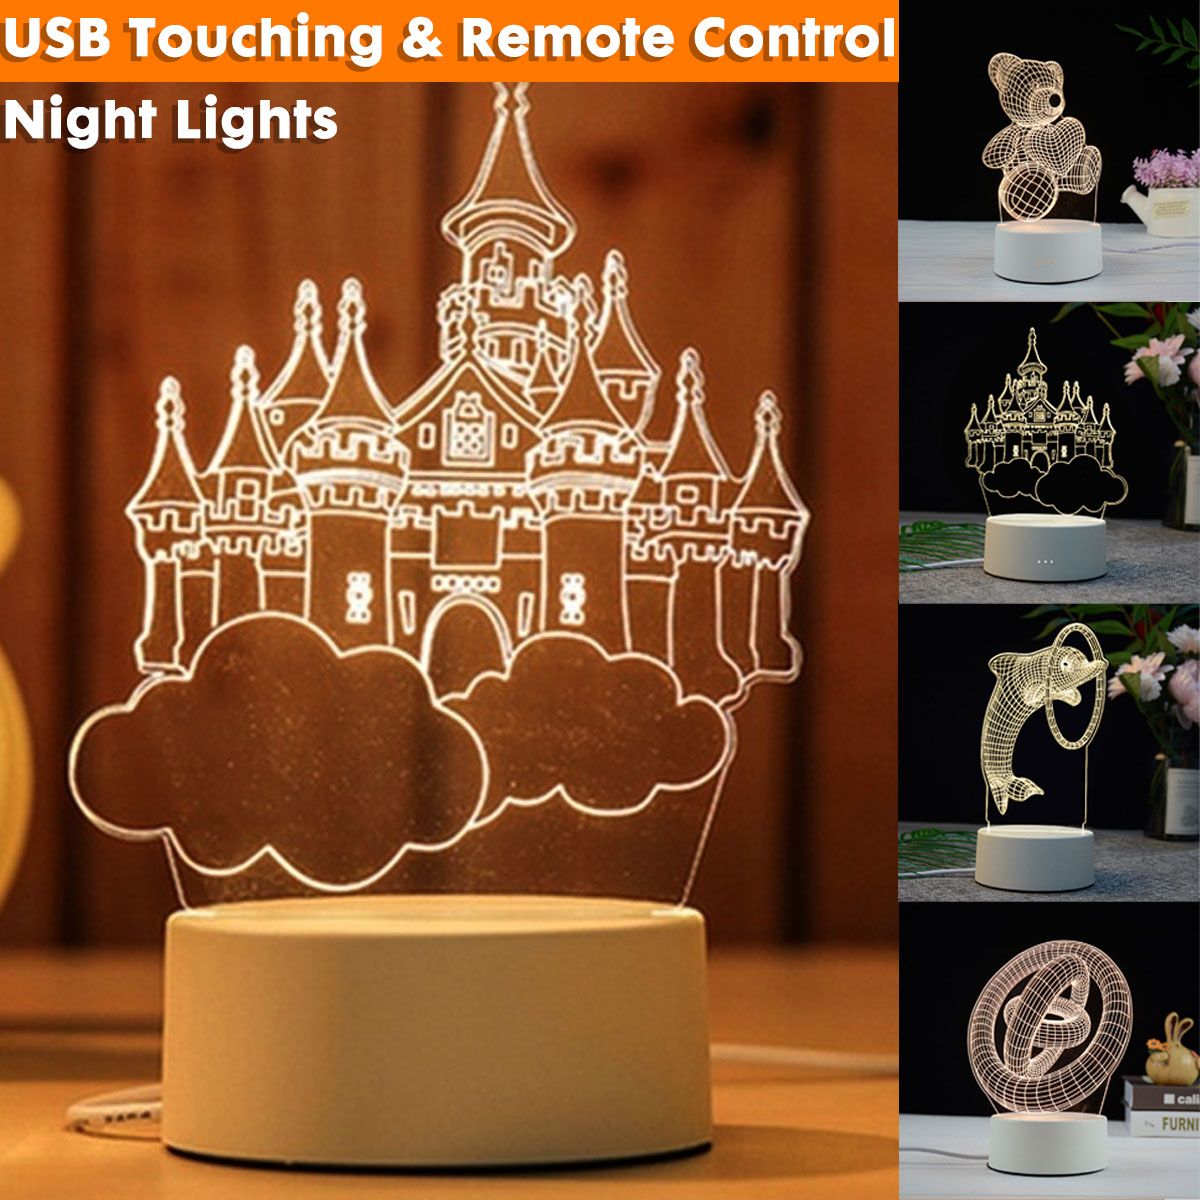 3D-LED-Table-Kid-Night-Light-Lamp-16-Color-USB-Bedroom-Child-Christmas-Gift-Remote-Control-1727573